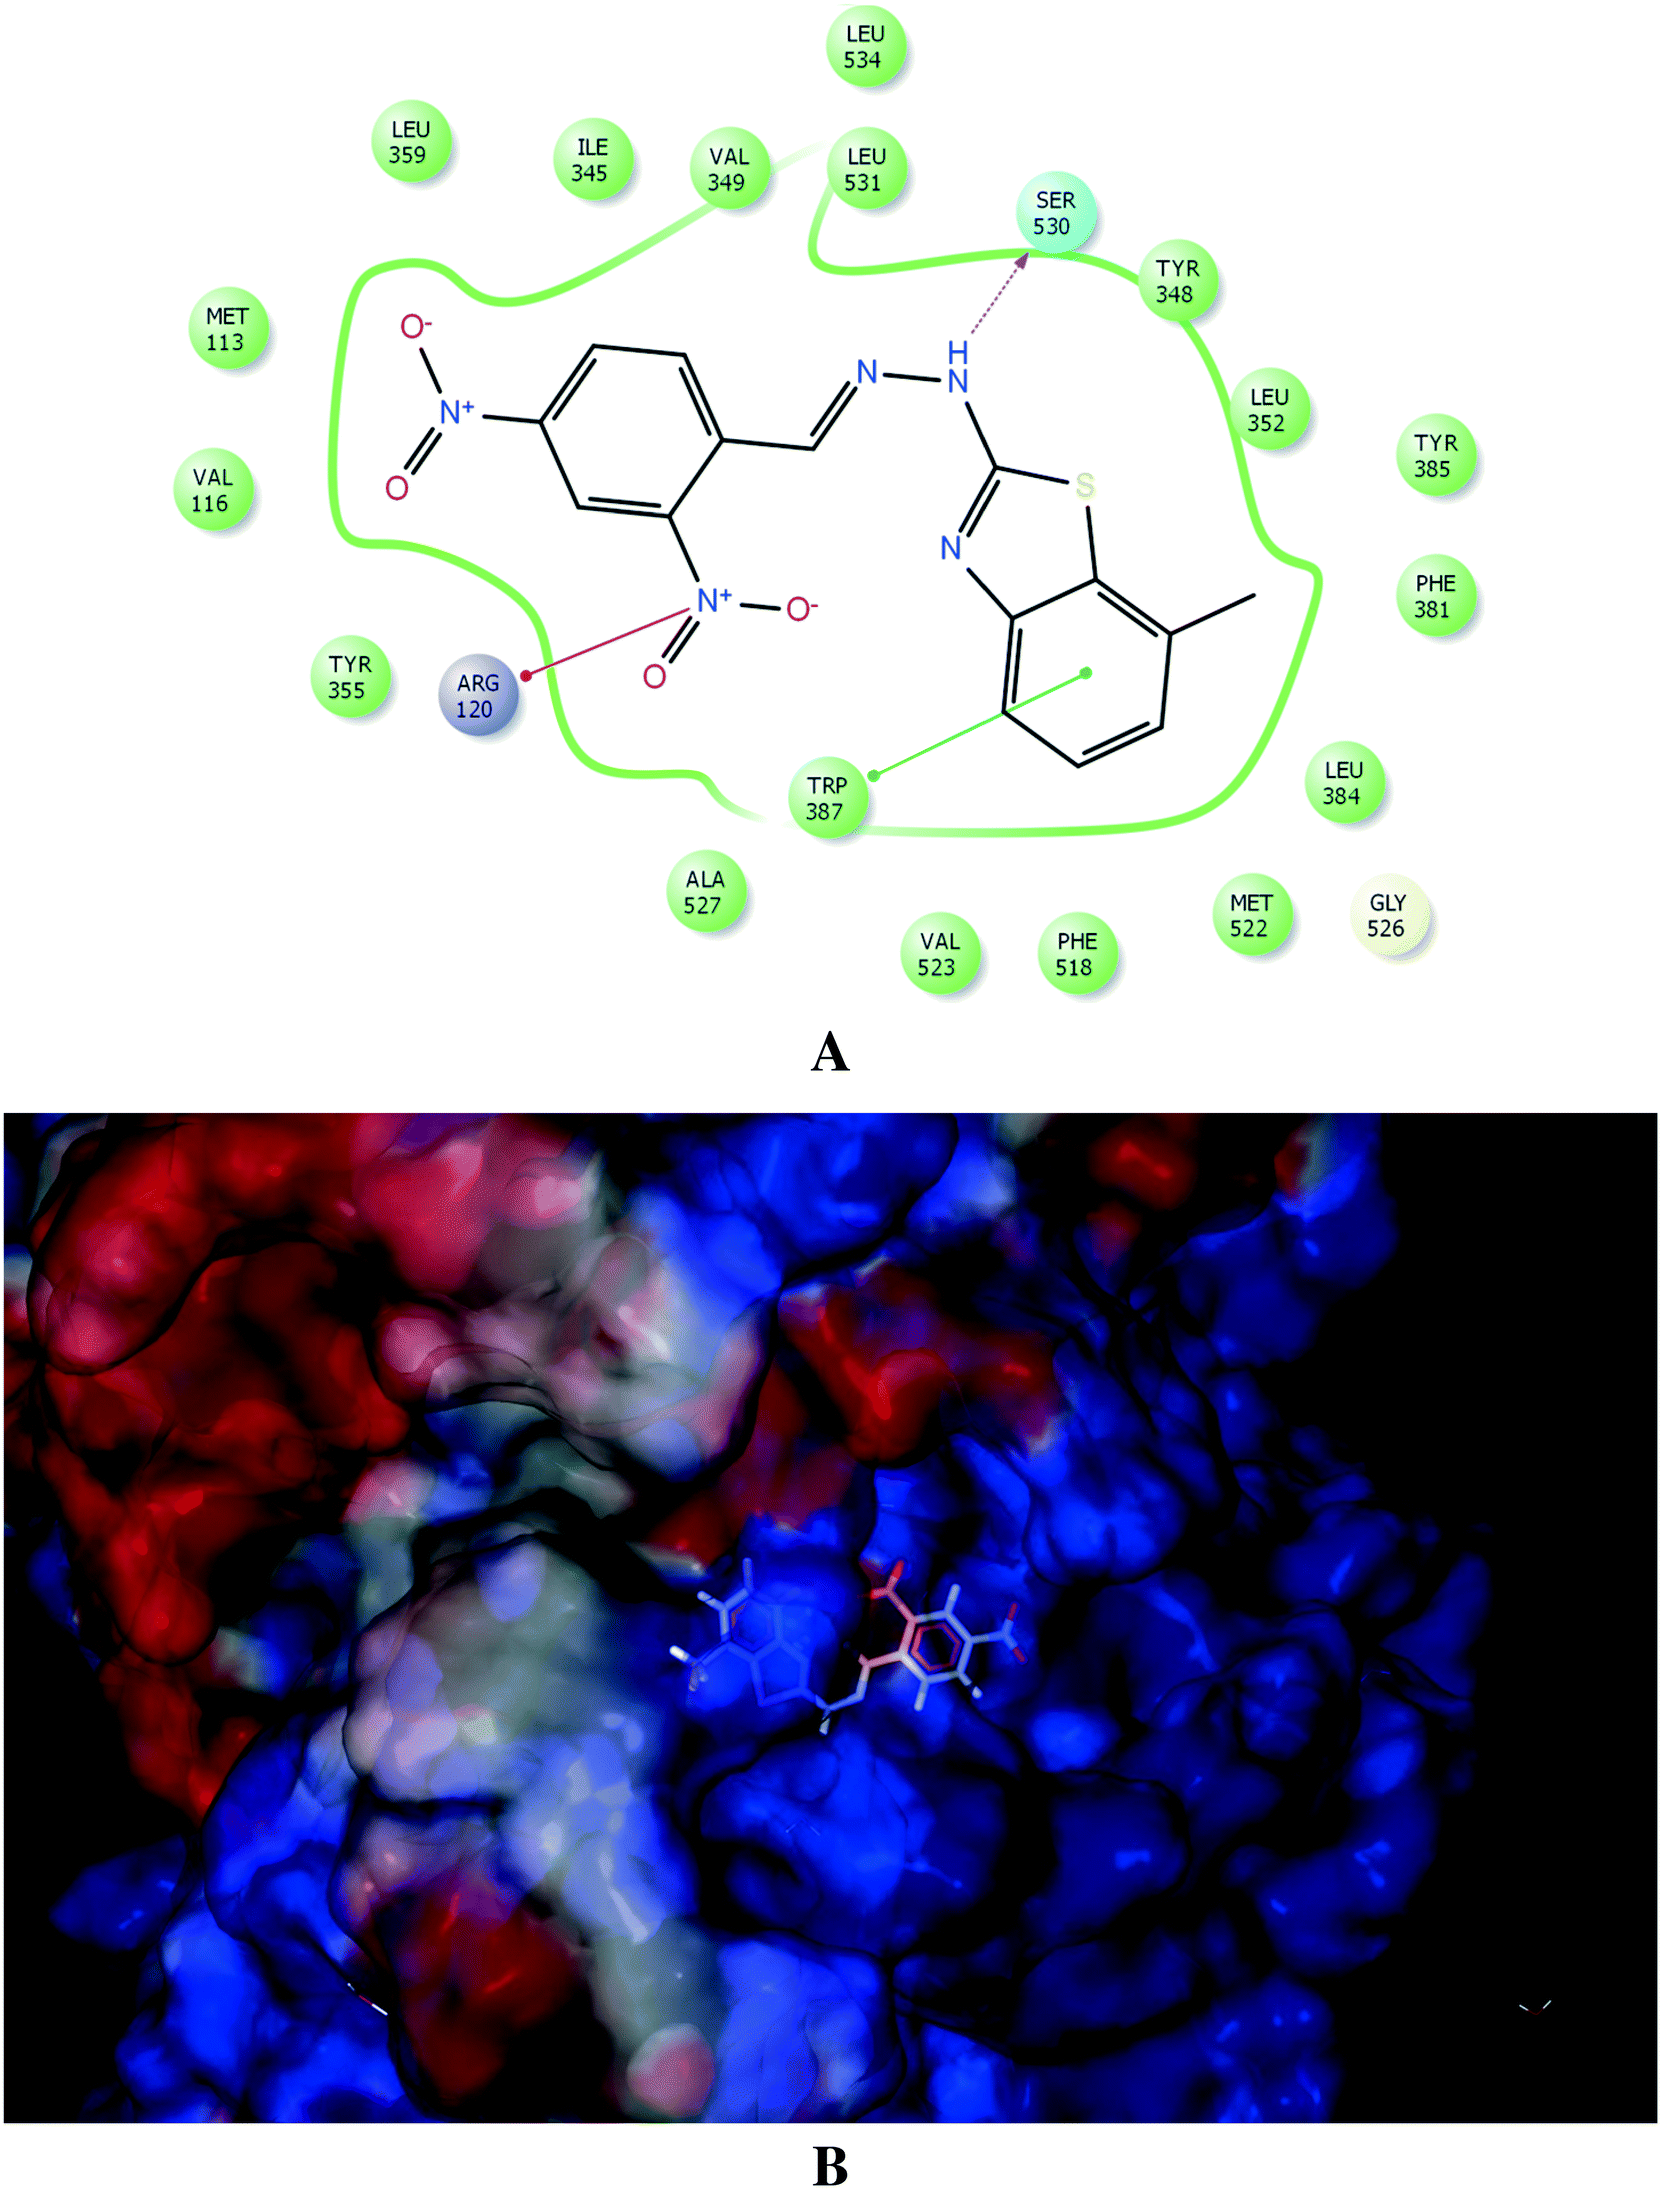 Synthesis of benzo[d]thiazole-hydrazone analogues: molecular docking and  SAR studies of potential H+/K+ ATPase inhibitors and anti-inflammatory  agents - MedChemComm (RSC Publishing)